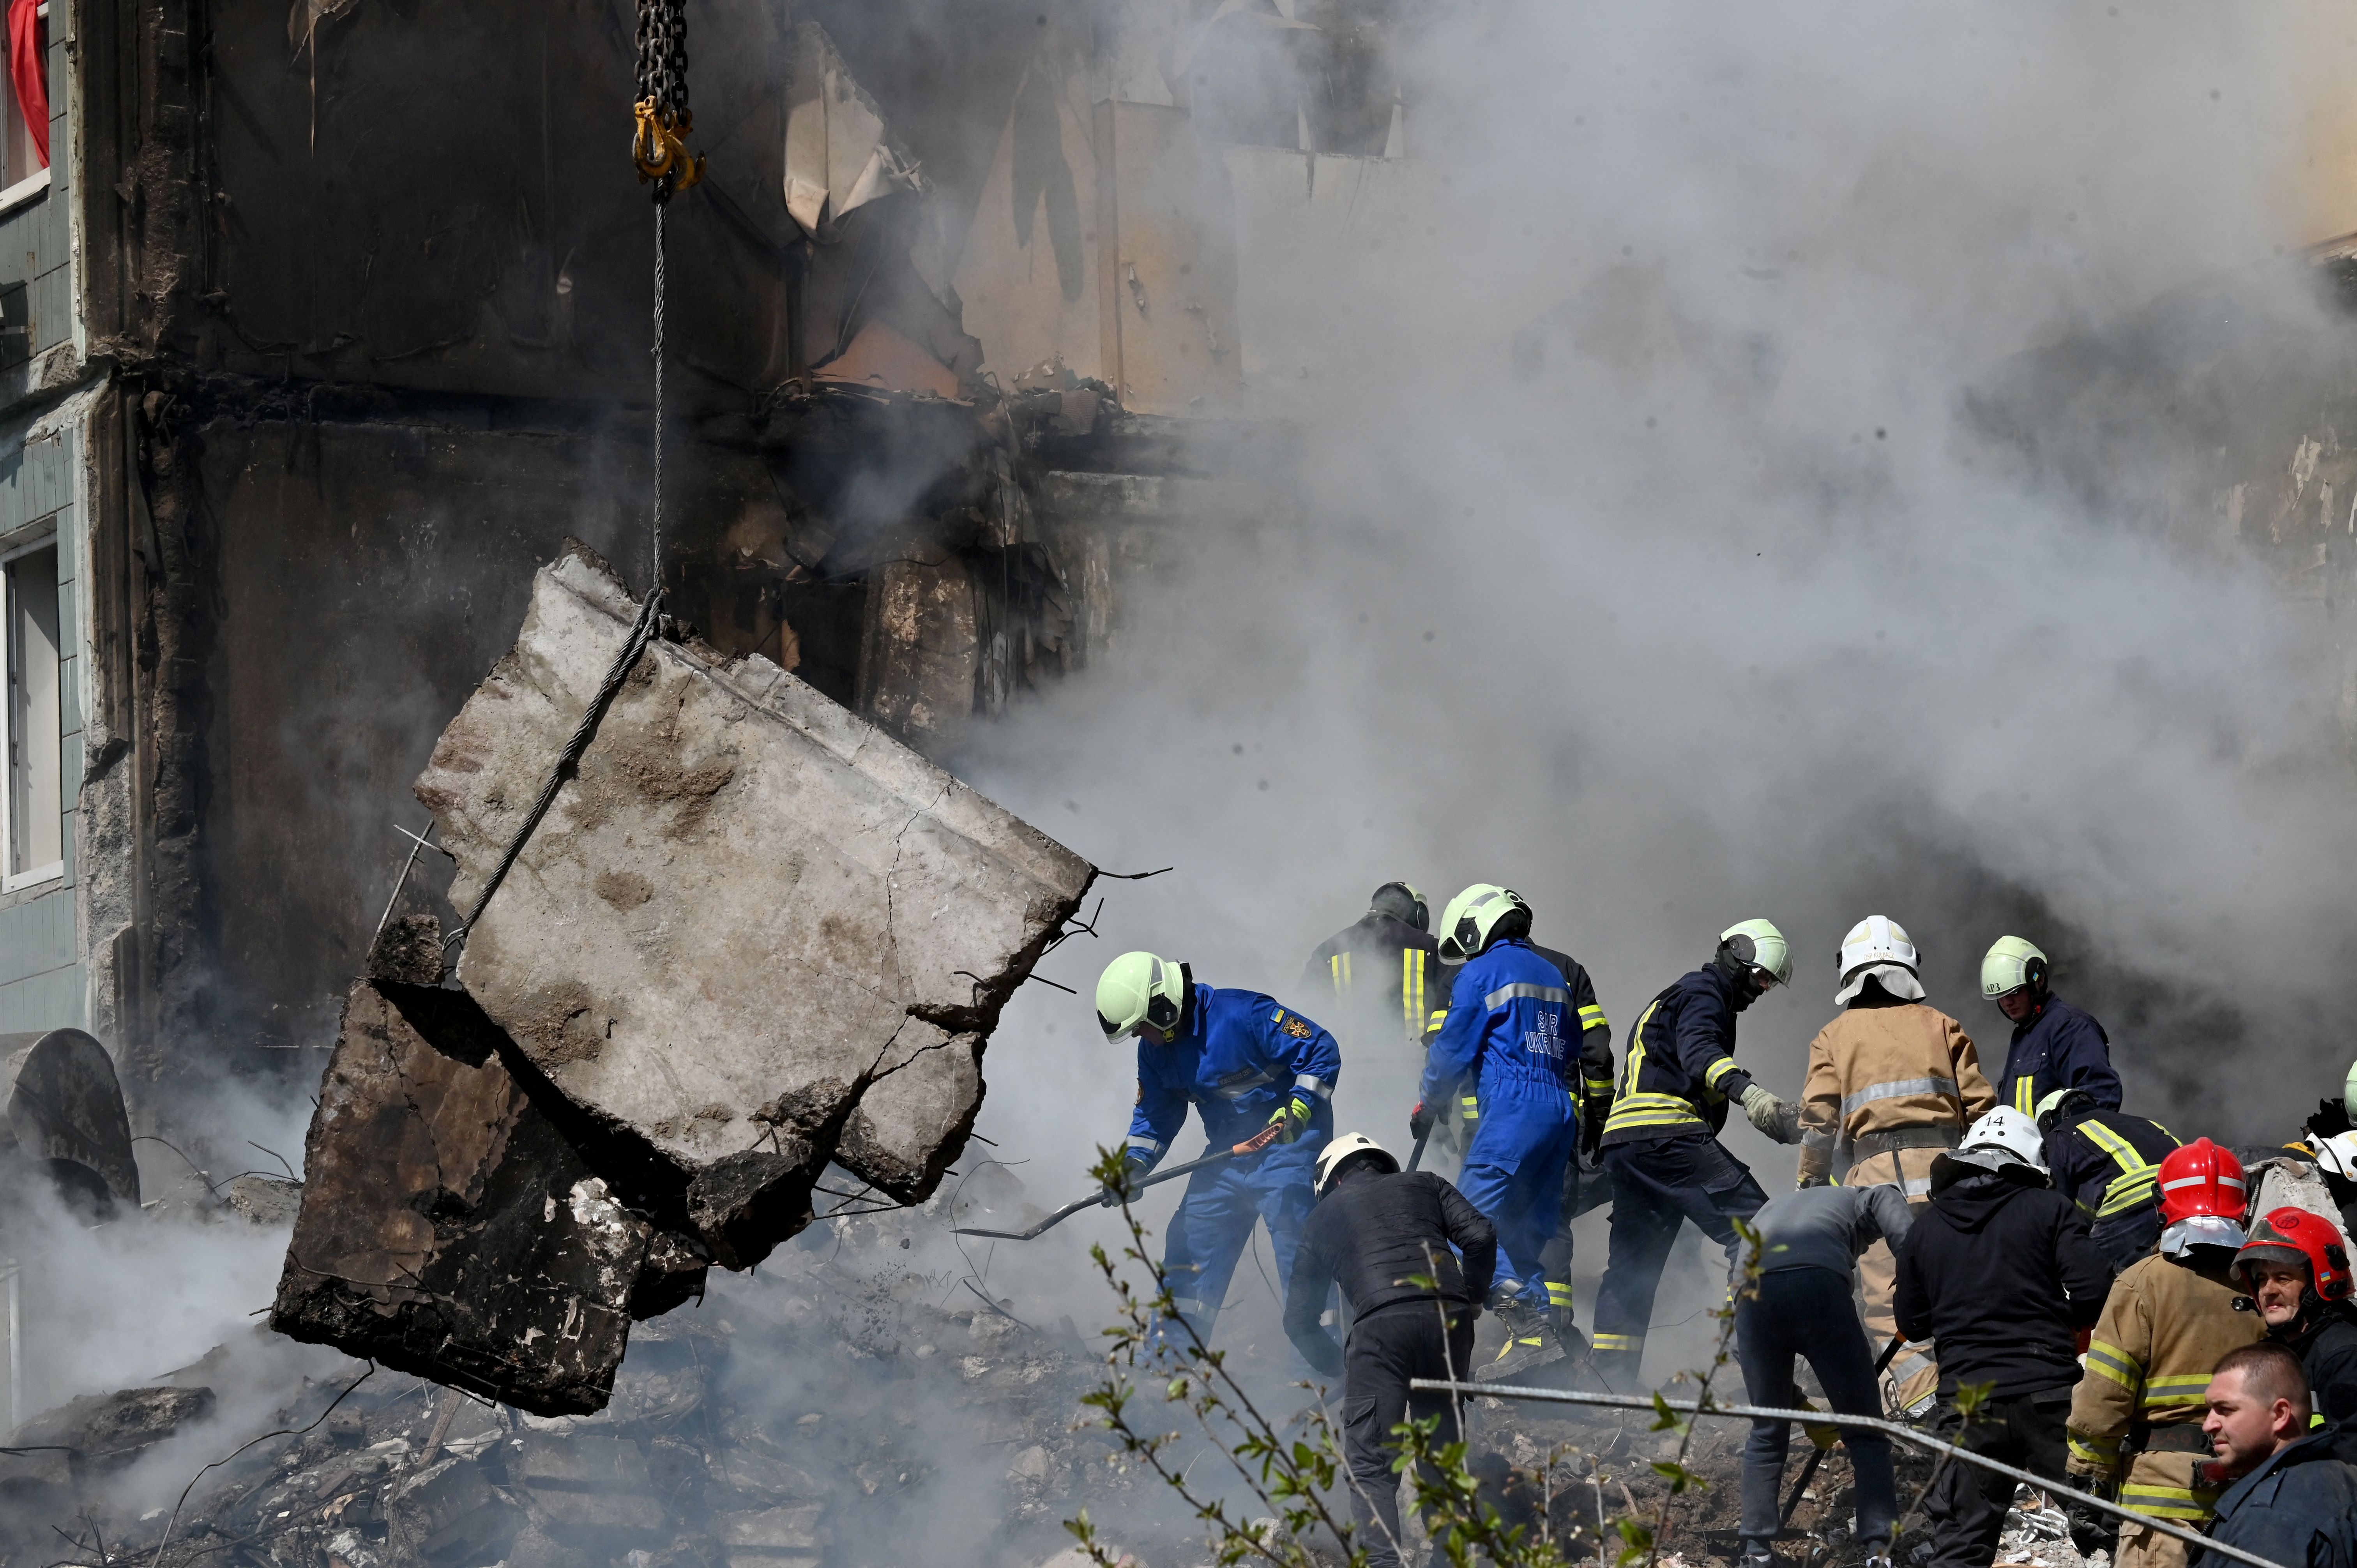 Rescue workers in helmets surrounded by rubble with smoke in the air. 